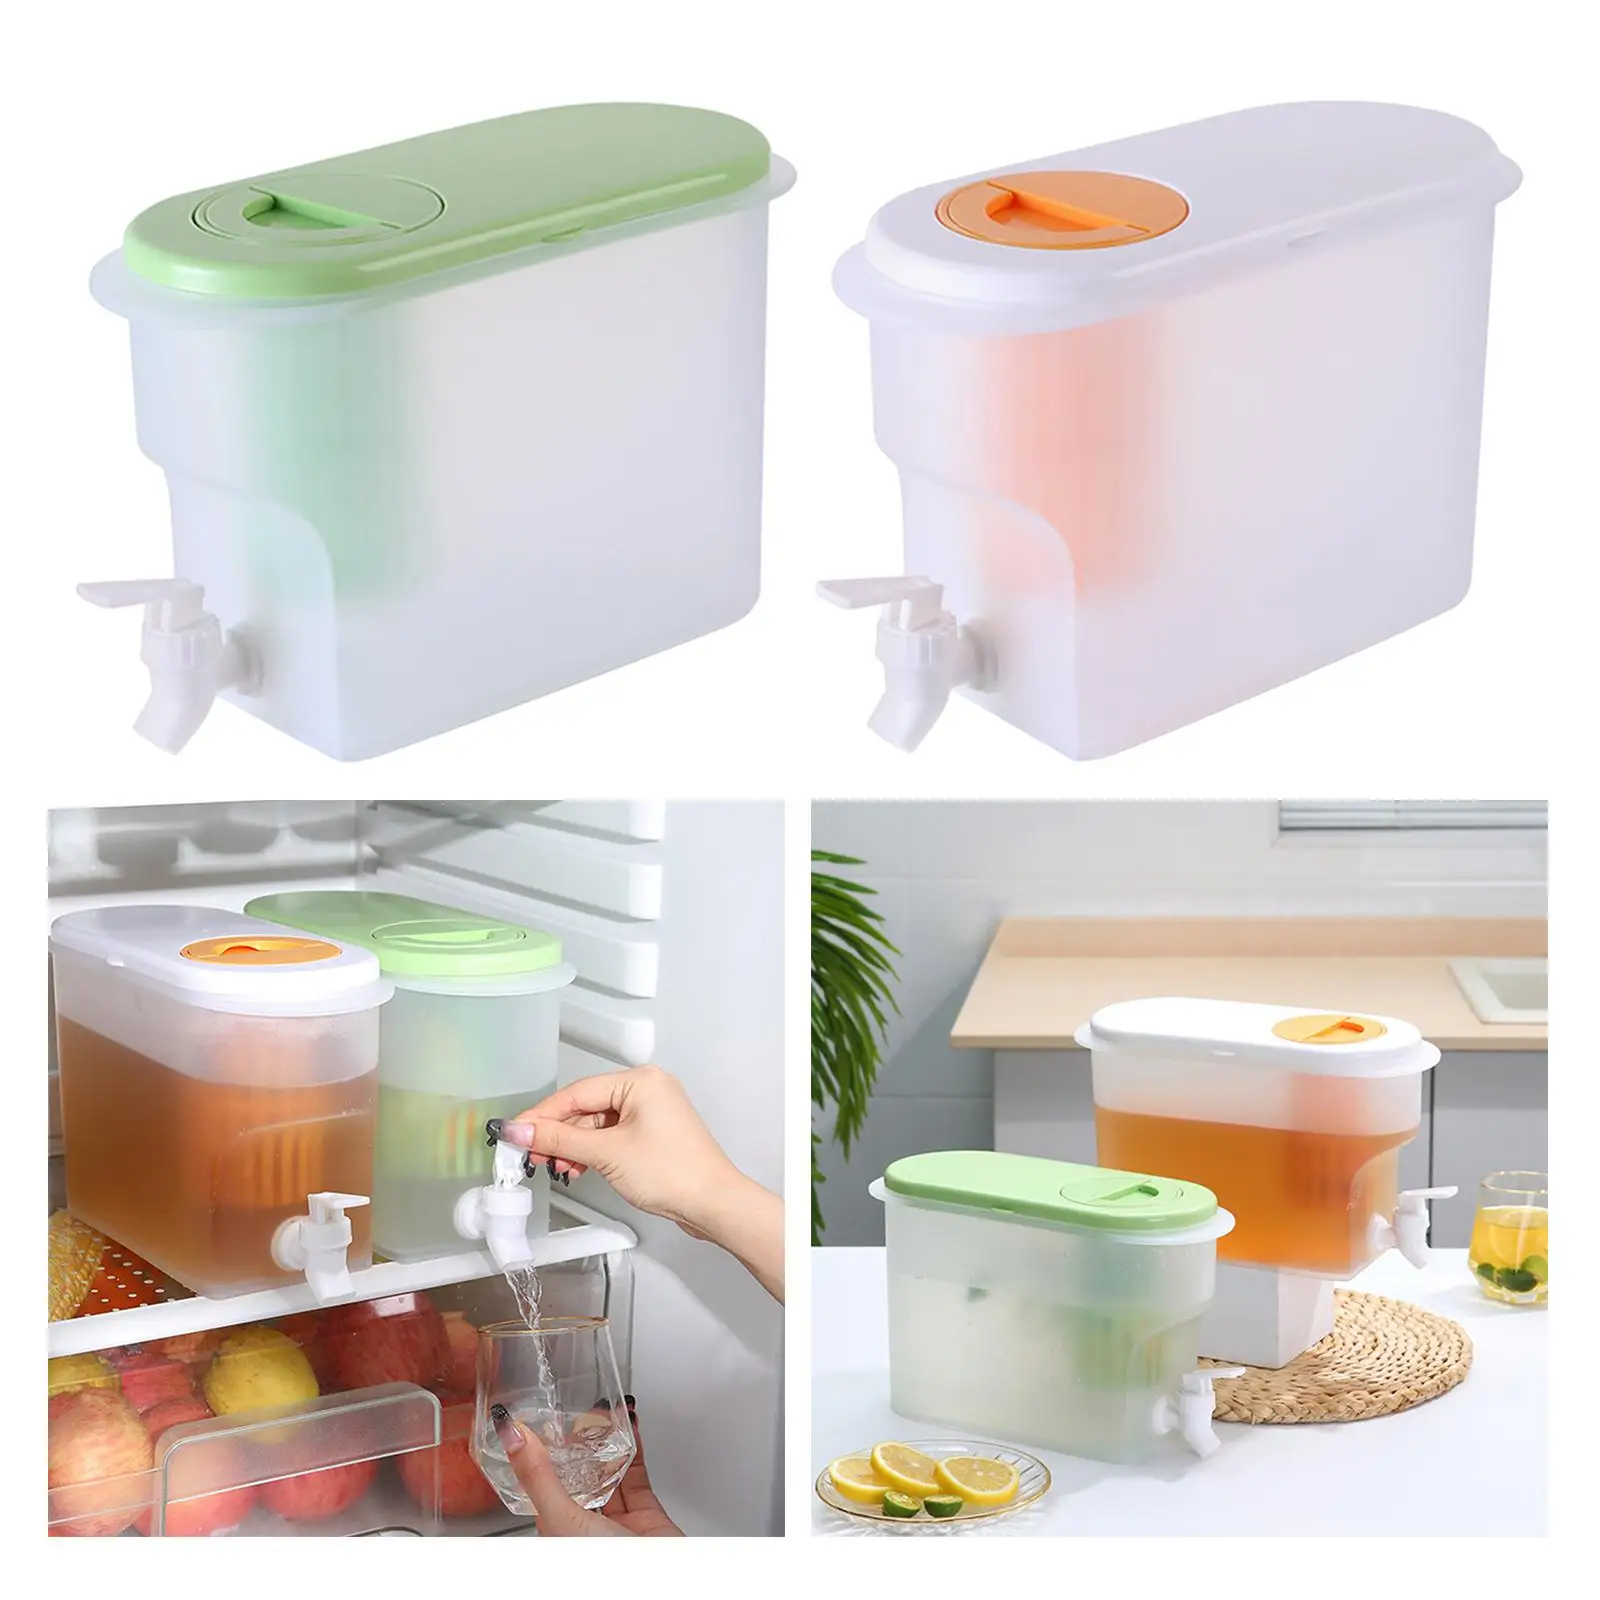 Cold Drink Juice Dispenser Jug with Leakproof Spigot Cold Kettle with Faucet for Outdoor Fridge Home Party Kitchen Countertop